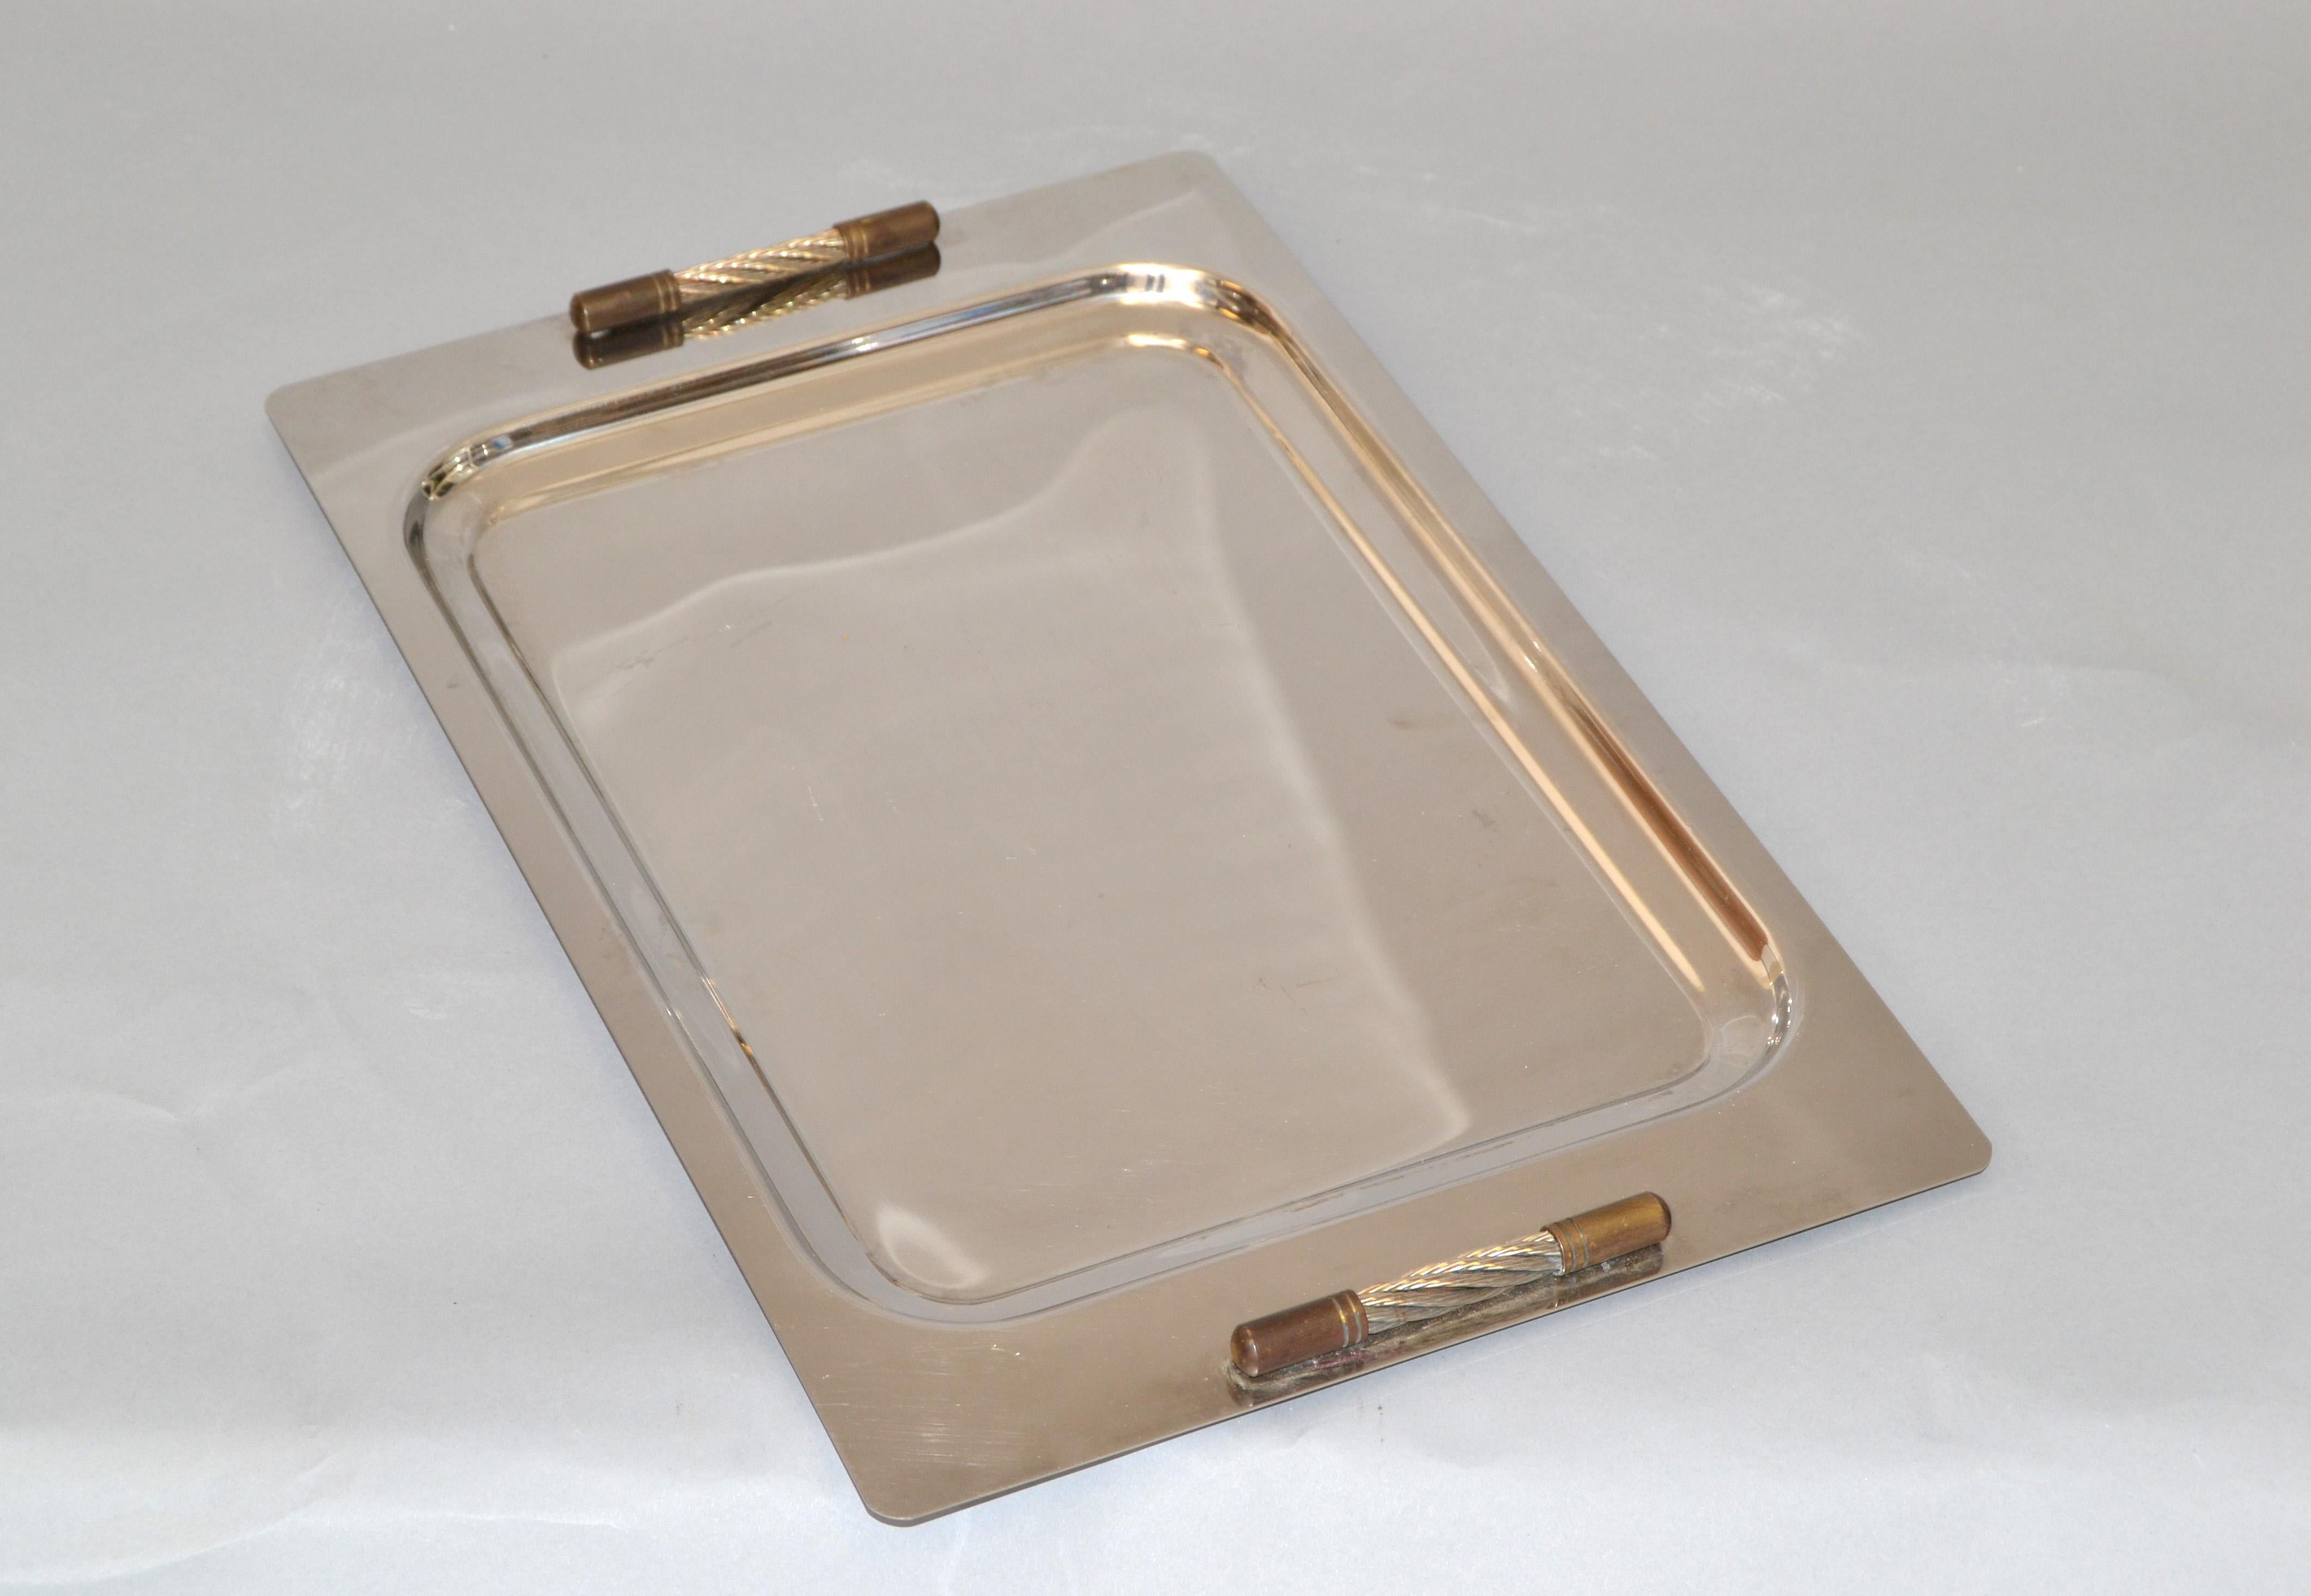 Mid-Century Modern decorative serving tray or platter made out of stainless steel with brass handles made in Argentina by Golden Art Steel Design. 
Serving Space is 12 x 8.5 inches.
Makers Mark on the reverse, 18/8 Inox.
 